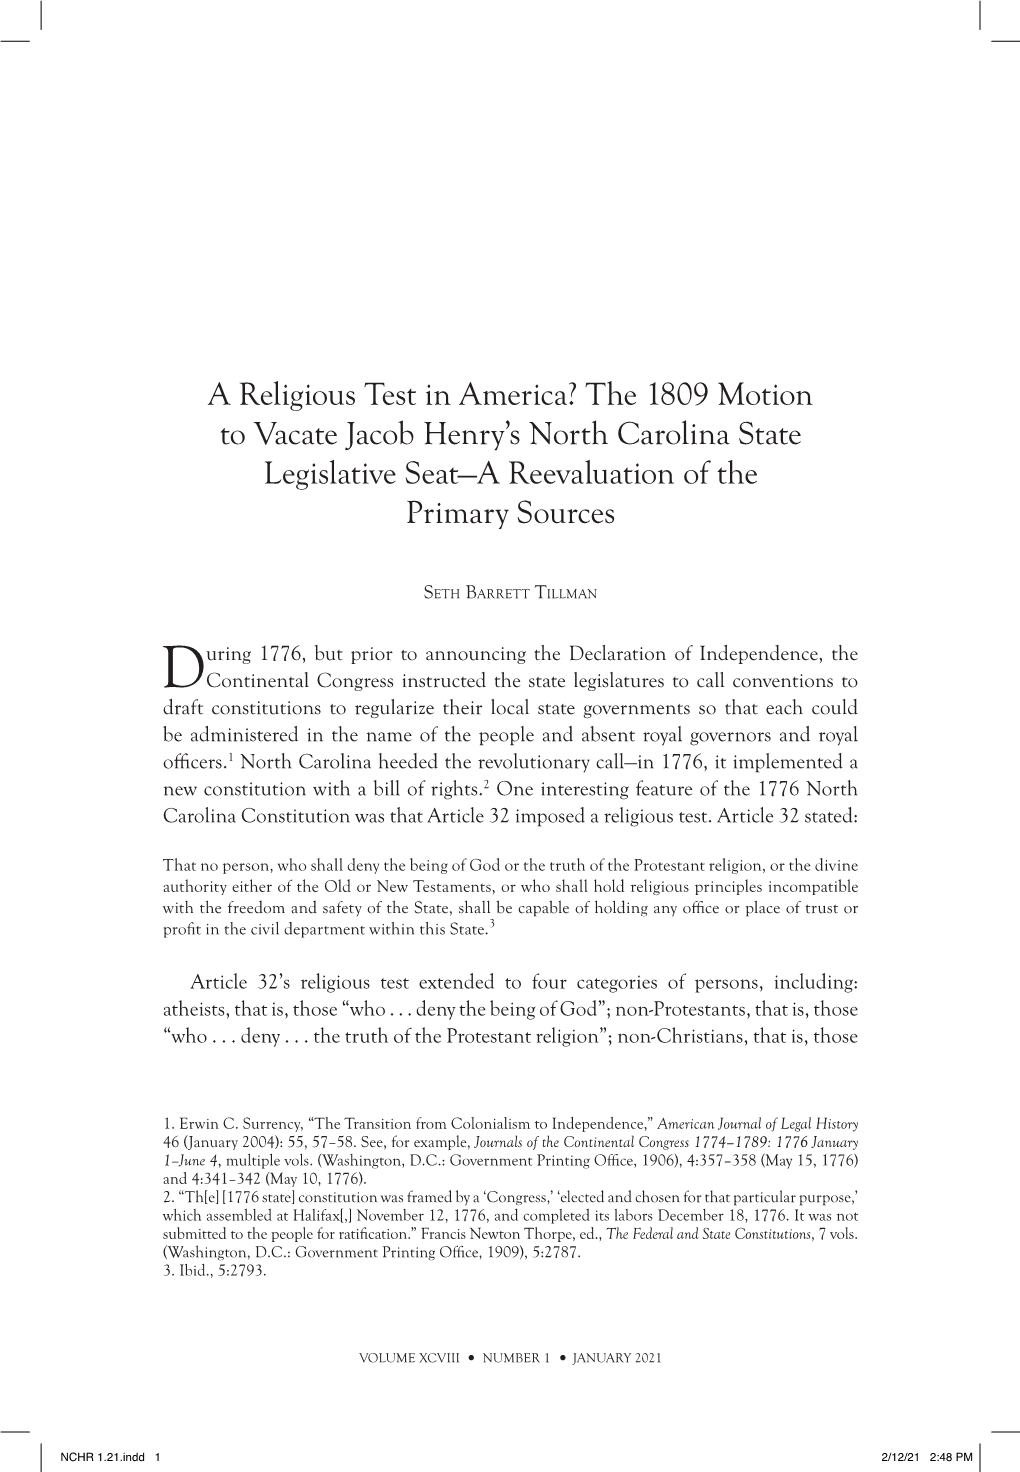 A Religious Test in America? the 1809 Motion to Vacate Jacob Henry’S North Carolina State Legislative Seat—A Reevaluation of the Primary Sources